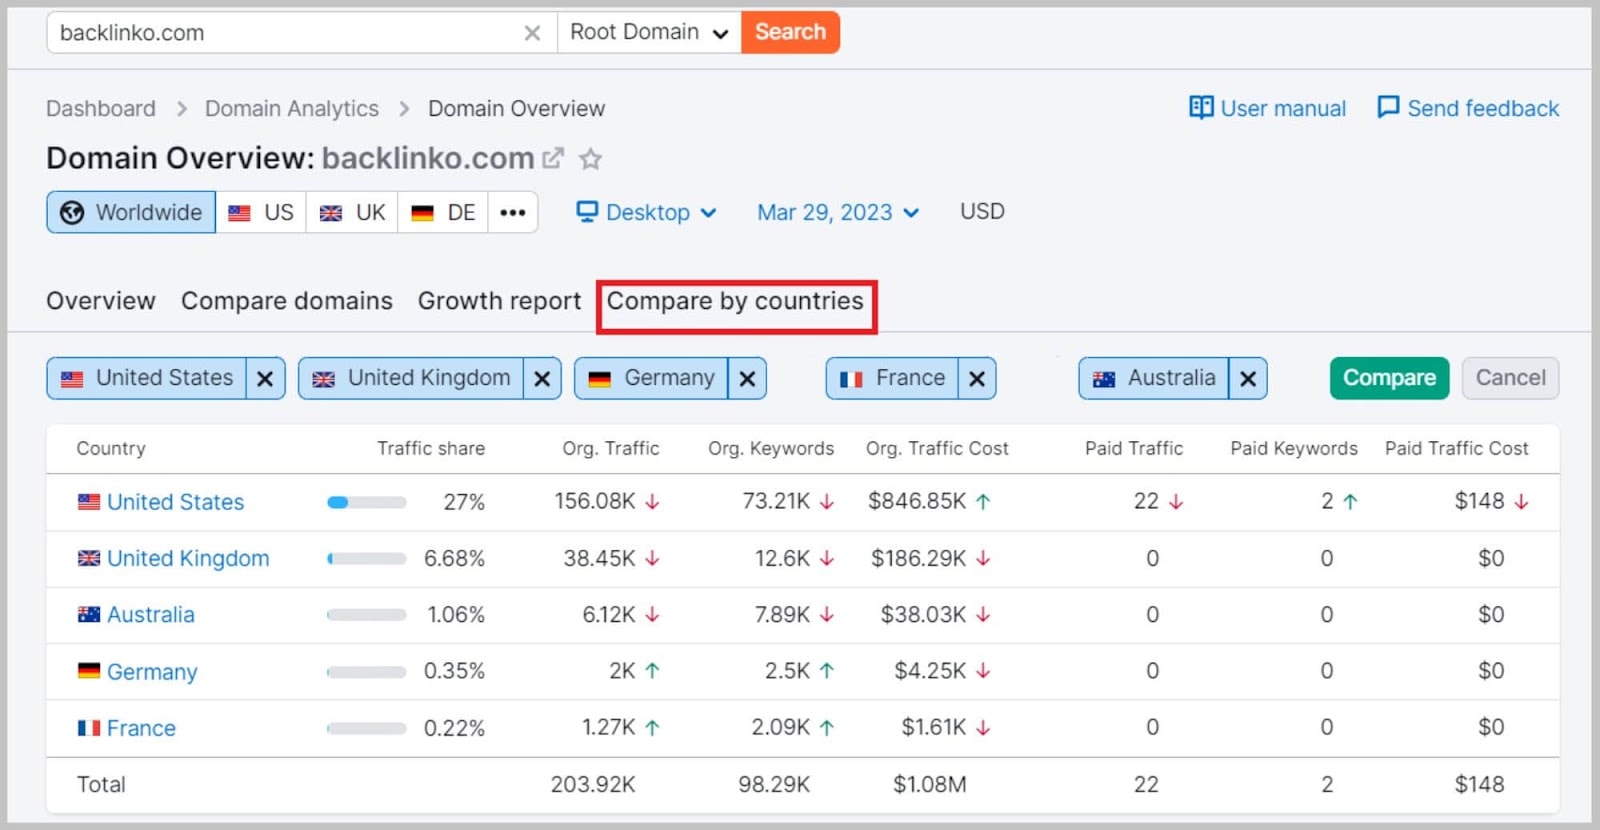 Semrush compares organic traffic by countries